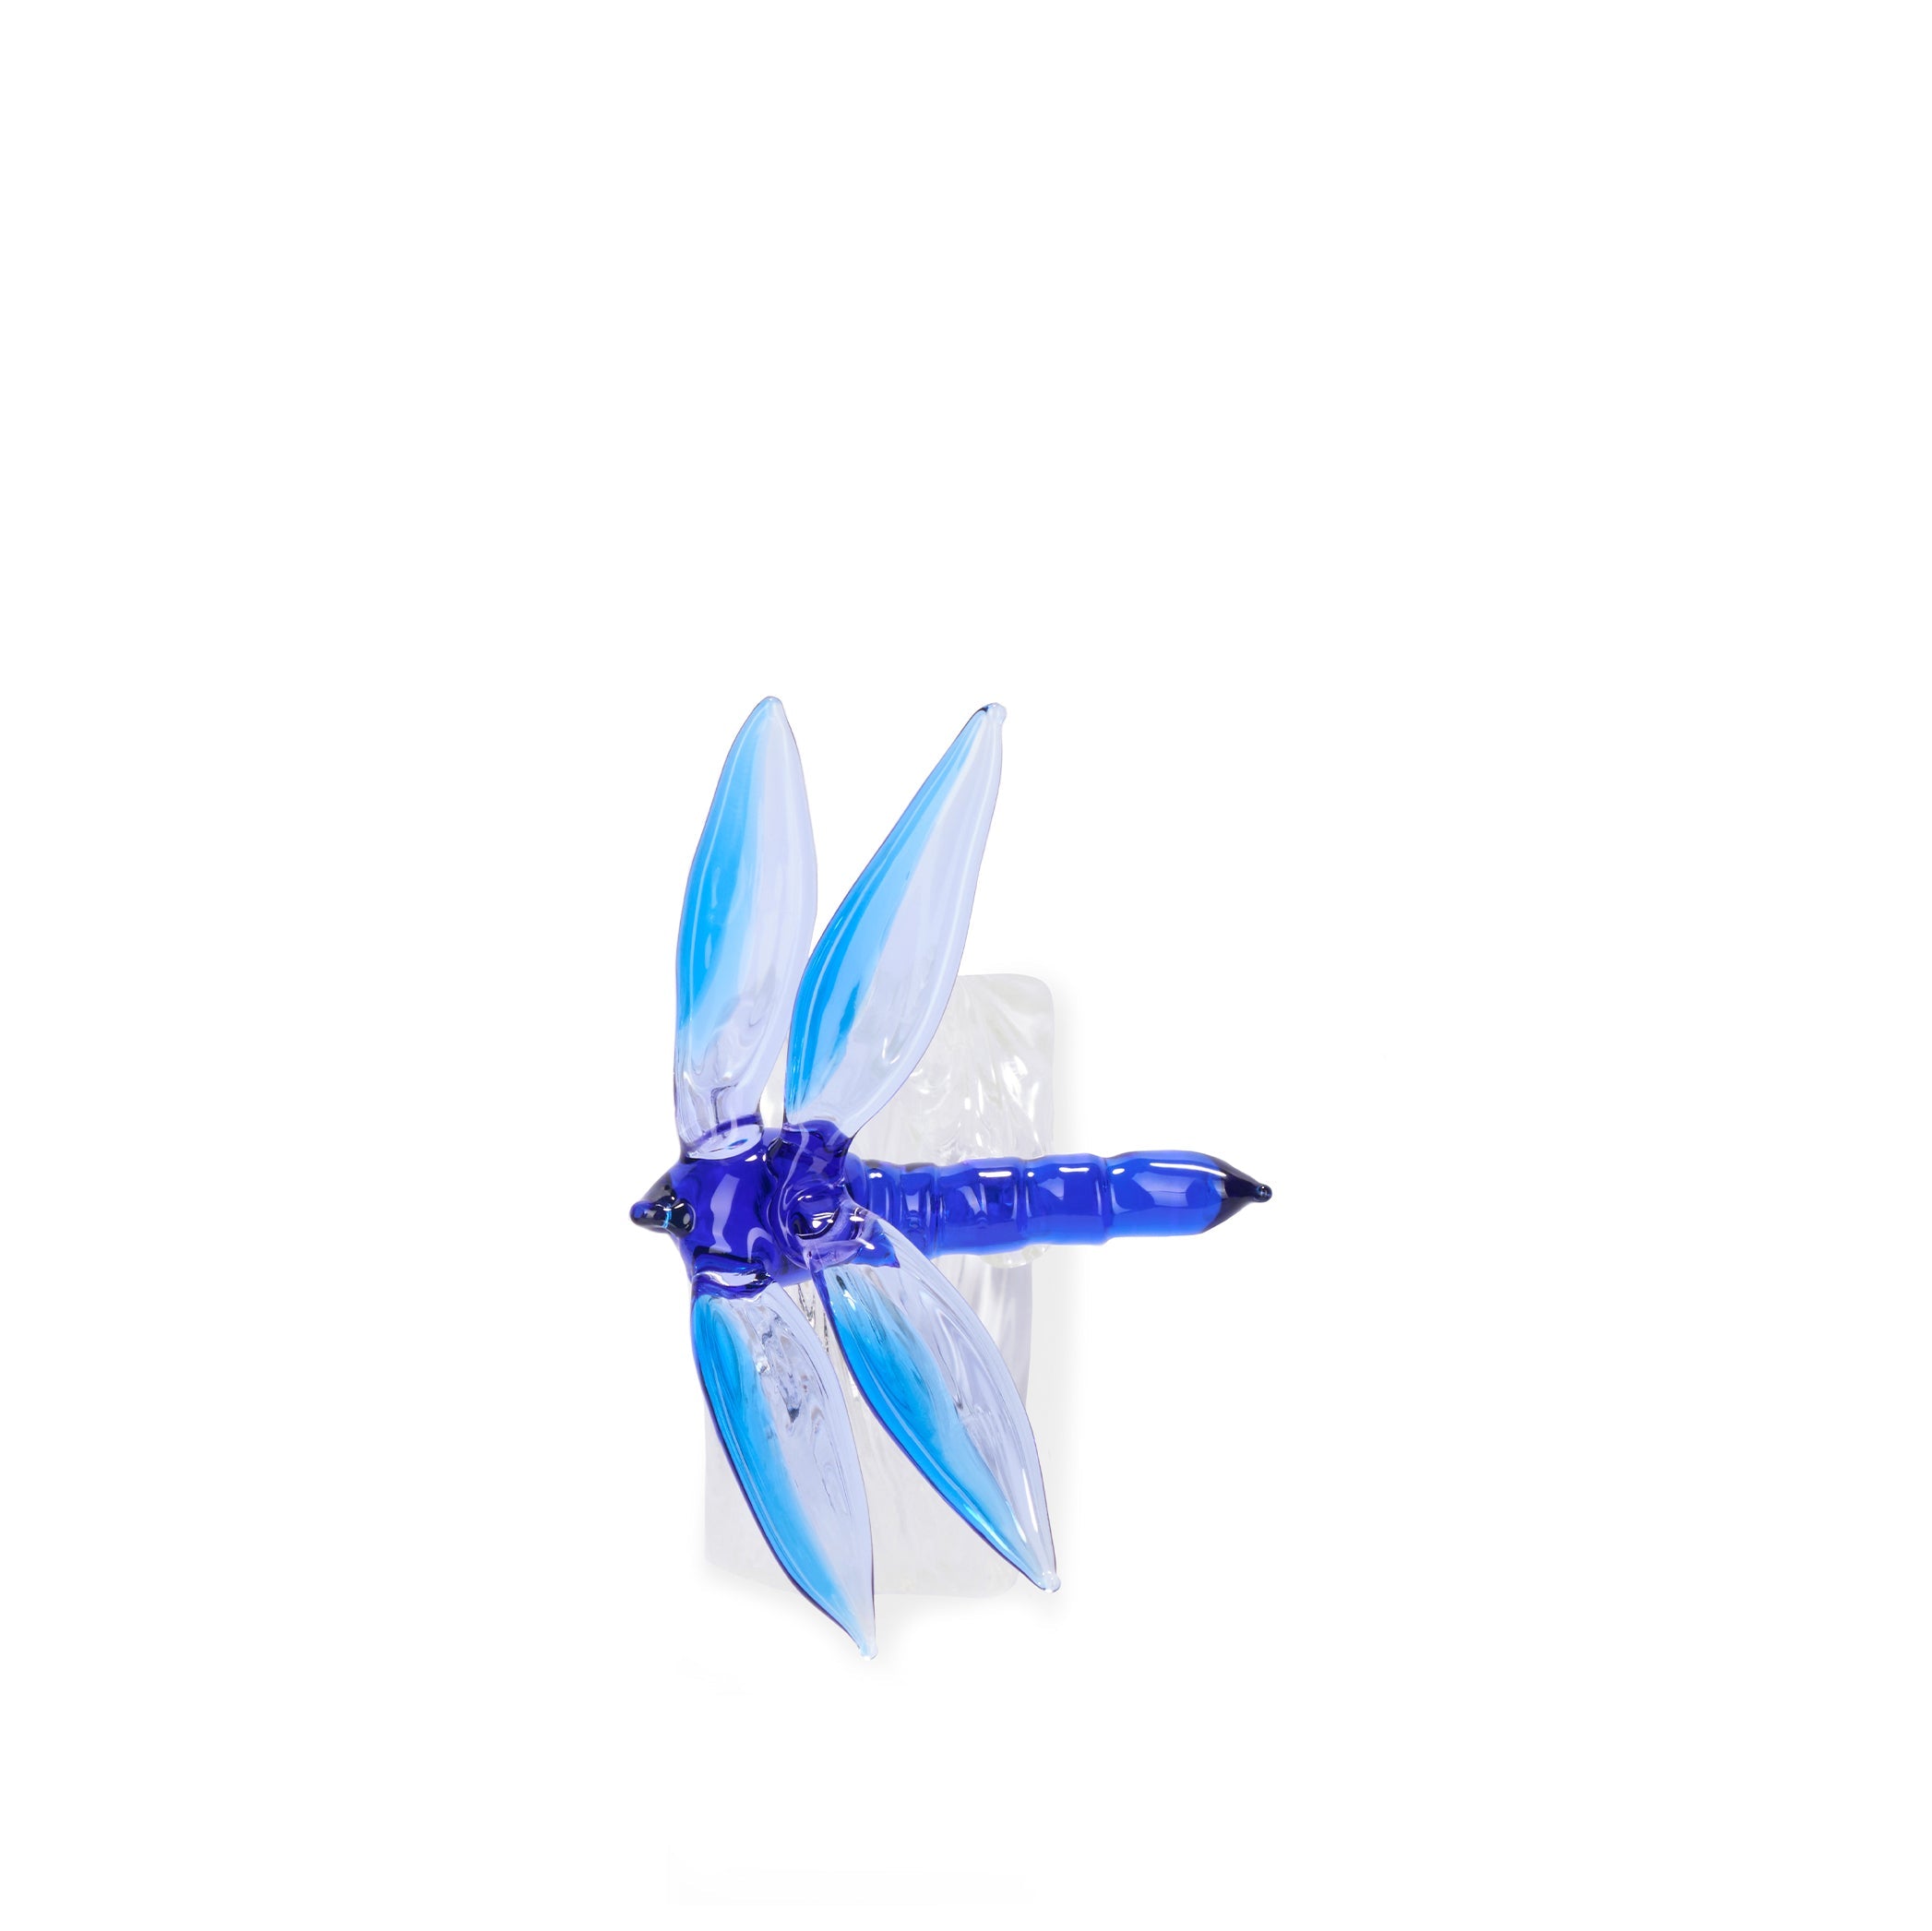 S&B Exclusive Handblown Glass Dragonfly Napkin Ring in Blue